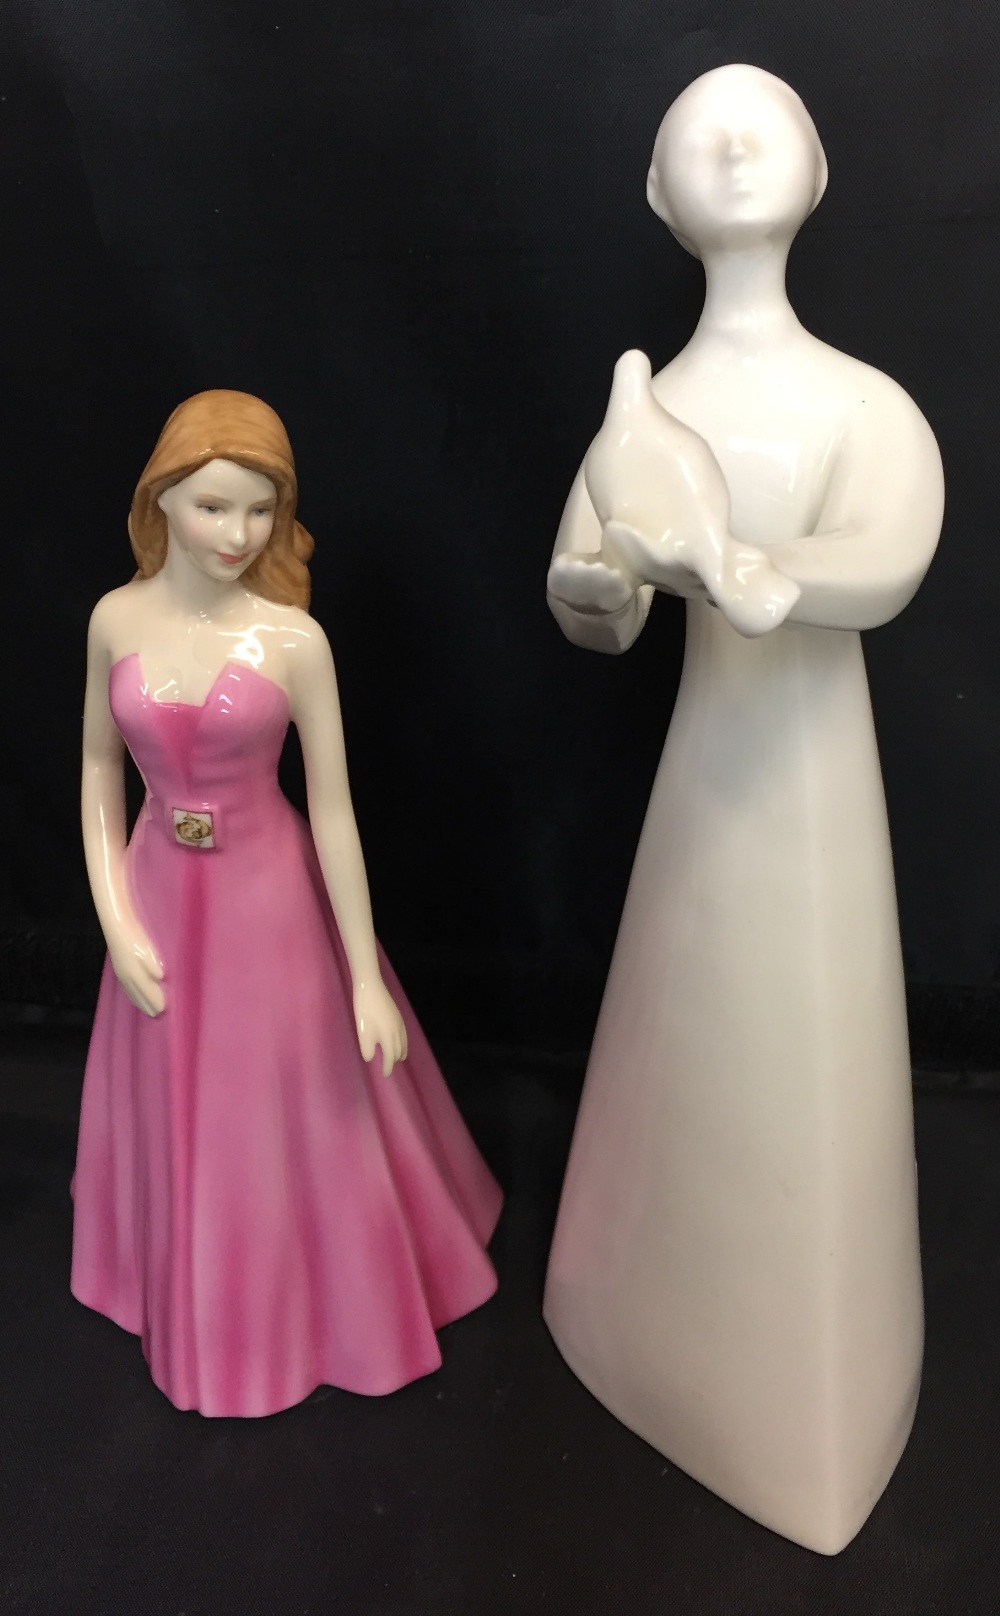 Two Royal Doulton figurines - Peace 22cm high and Pisces 18cm high (saleroom location Z07)